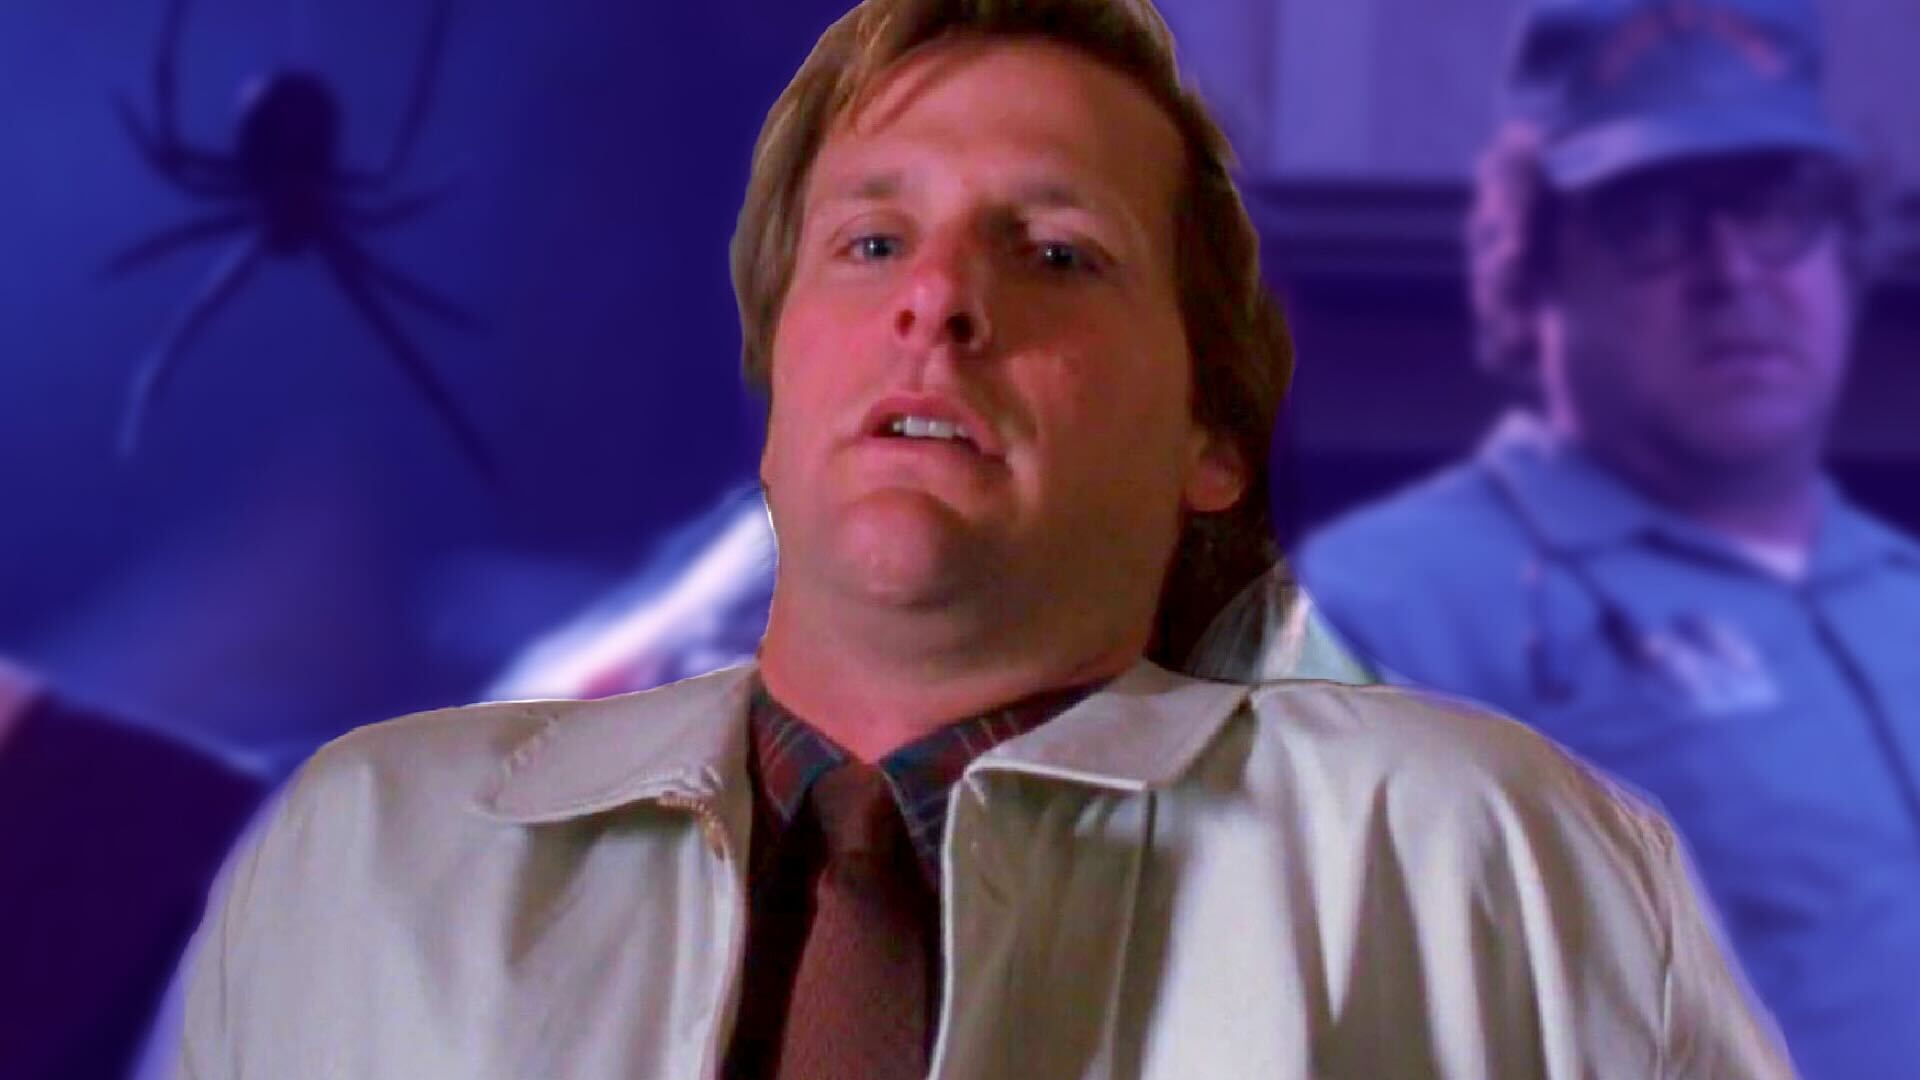 Custom image of scenes from Arachnophobia with Jeff Daniels at the front